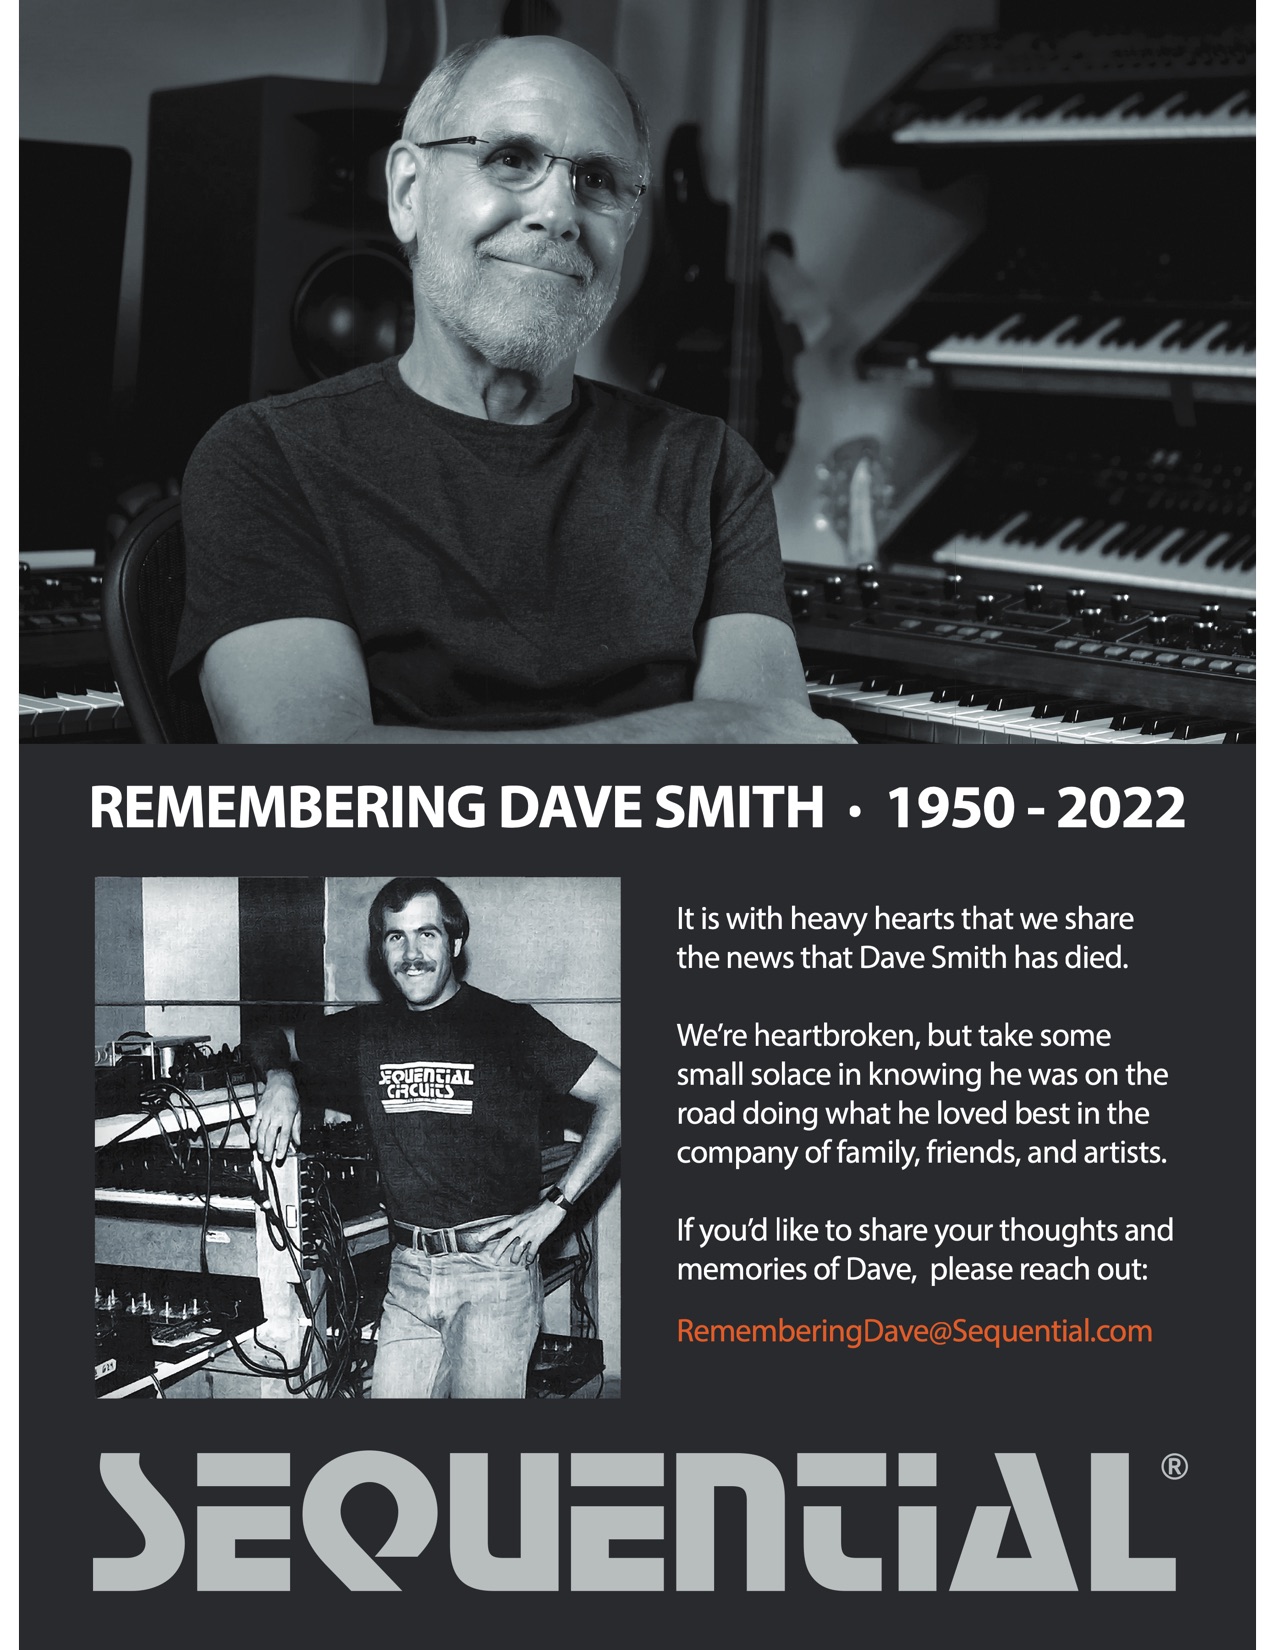 1020203d1654120927-remembering-dave-smith-1950-2022-a-remembering-dave-poster.jpg